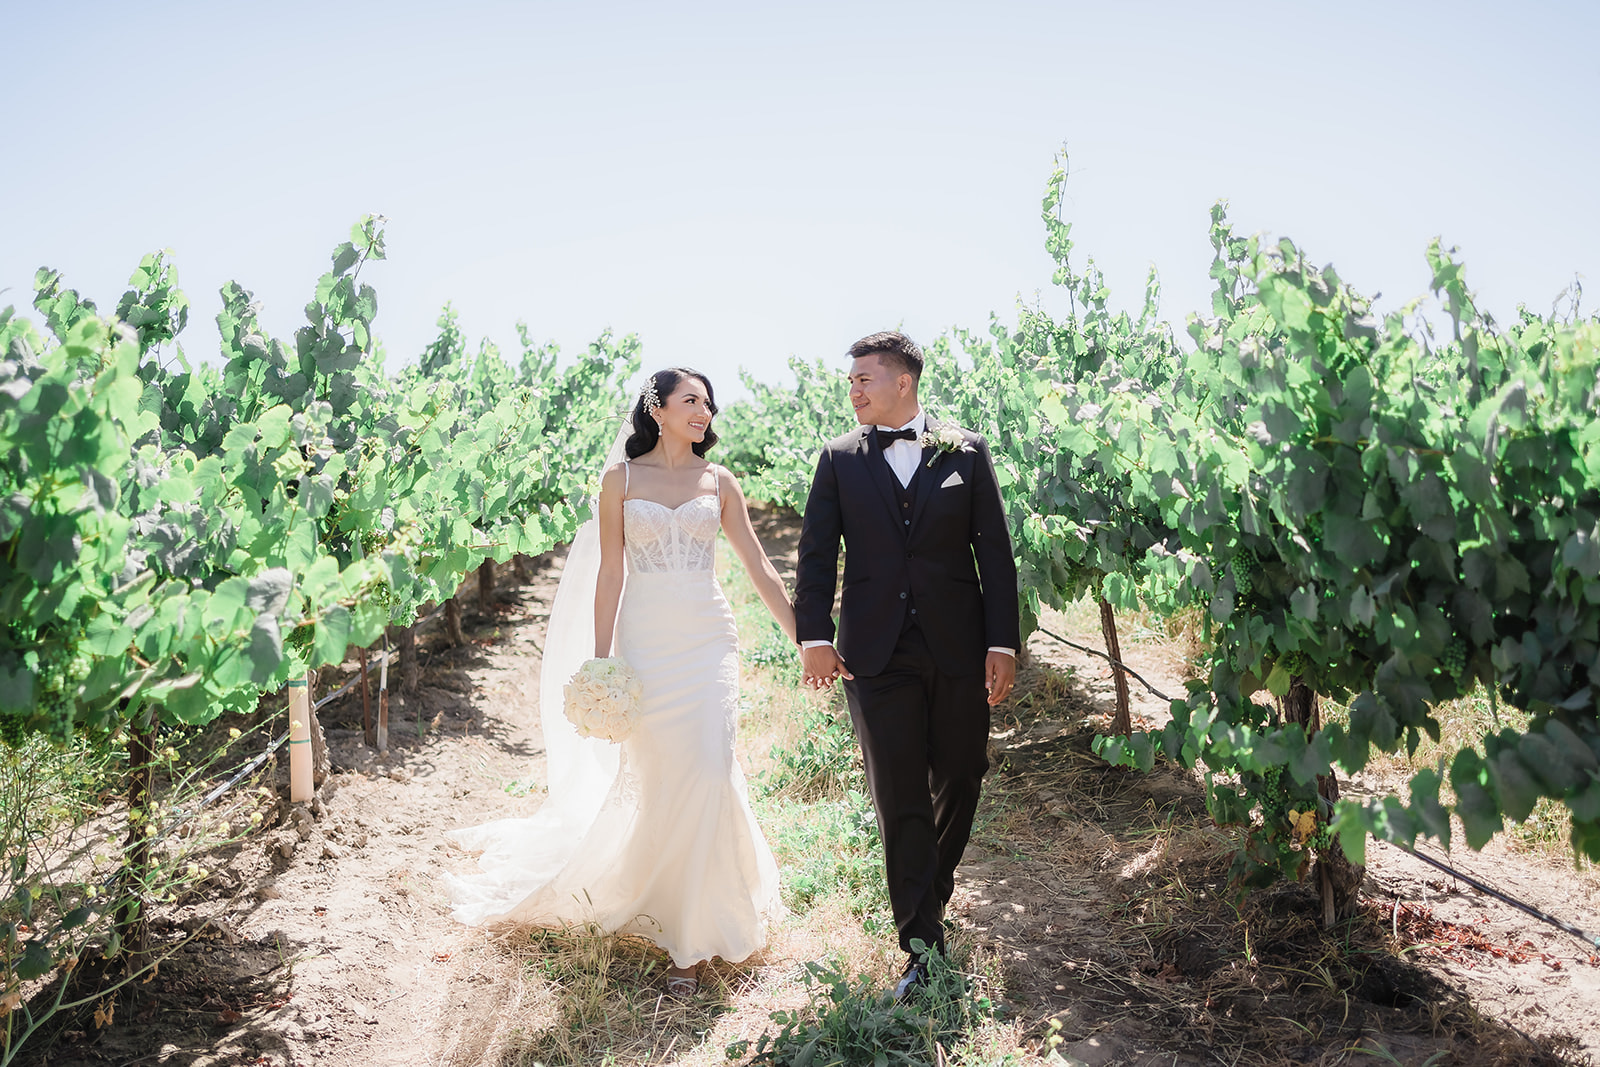 Stunning portrait of Nallely and Ansony amidst the vineyards, overcoming strong winds to capture the beauty of their lov